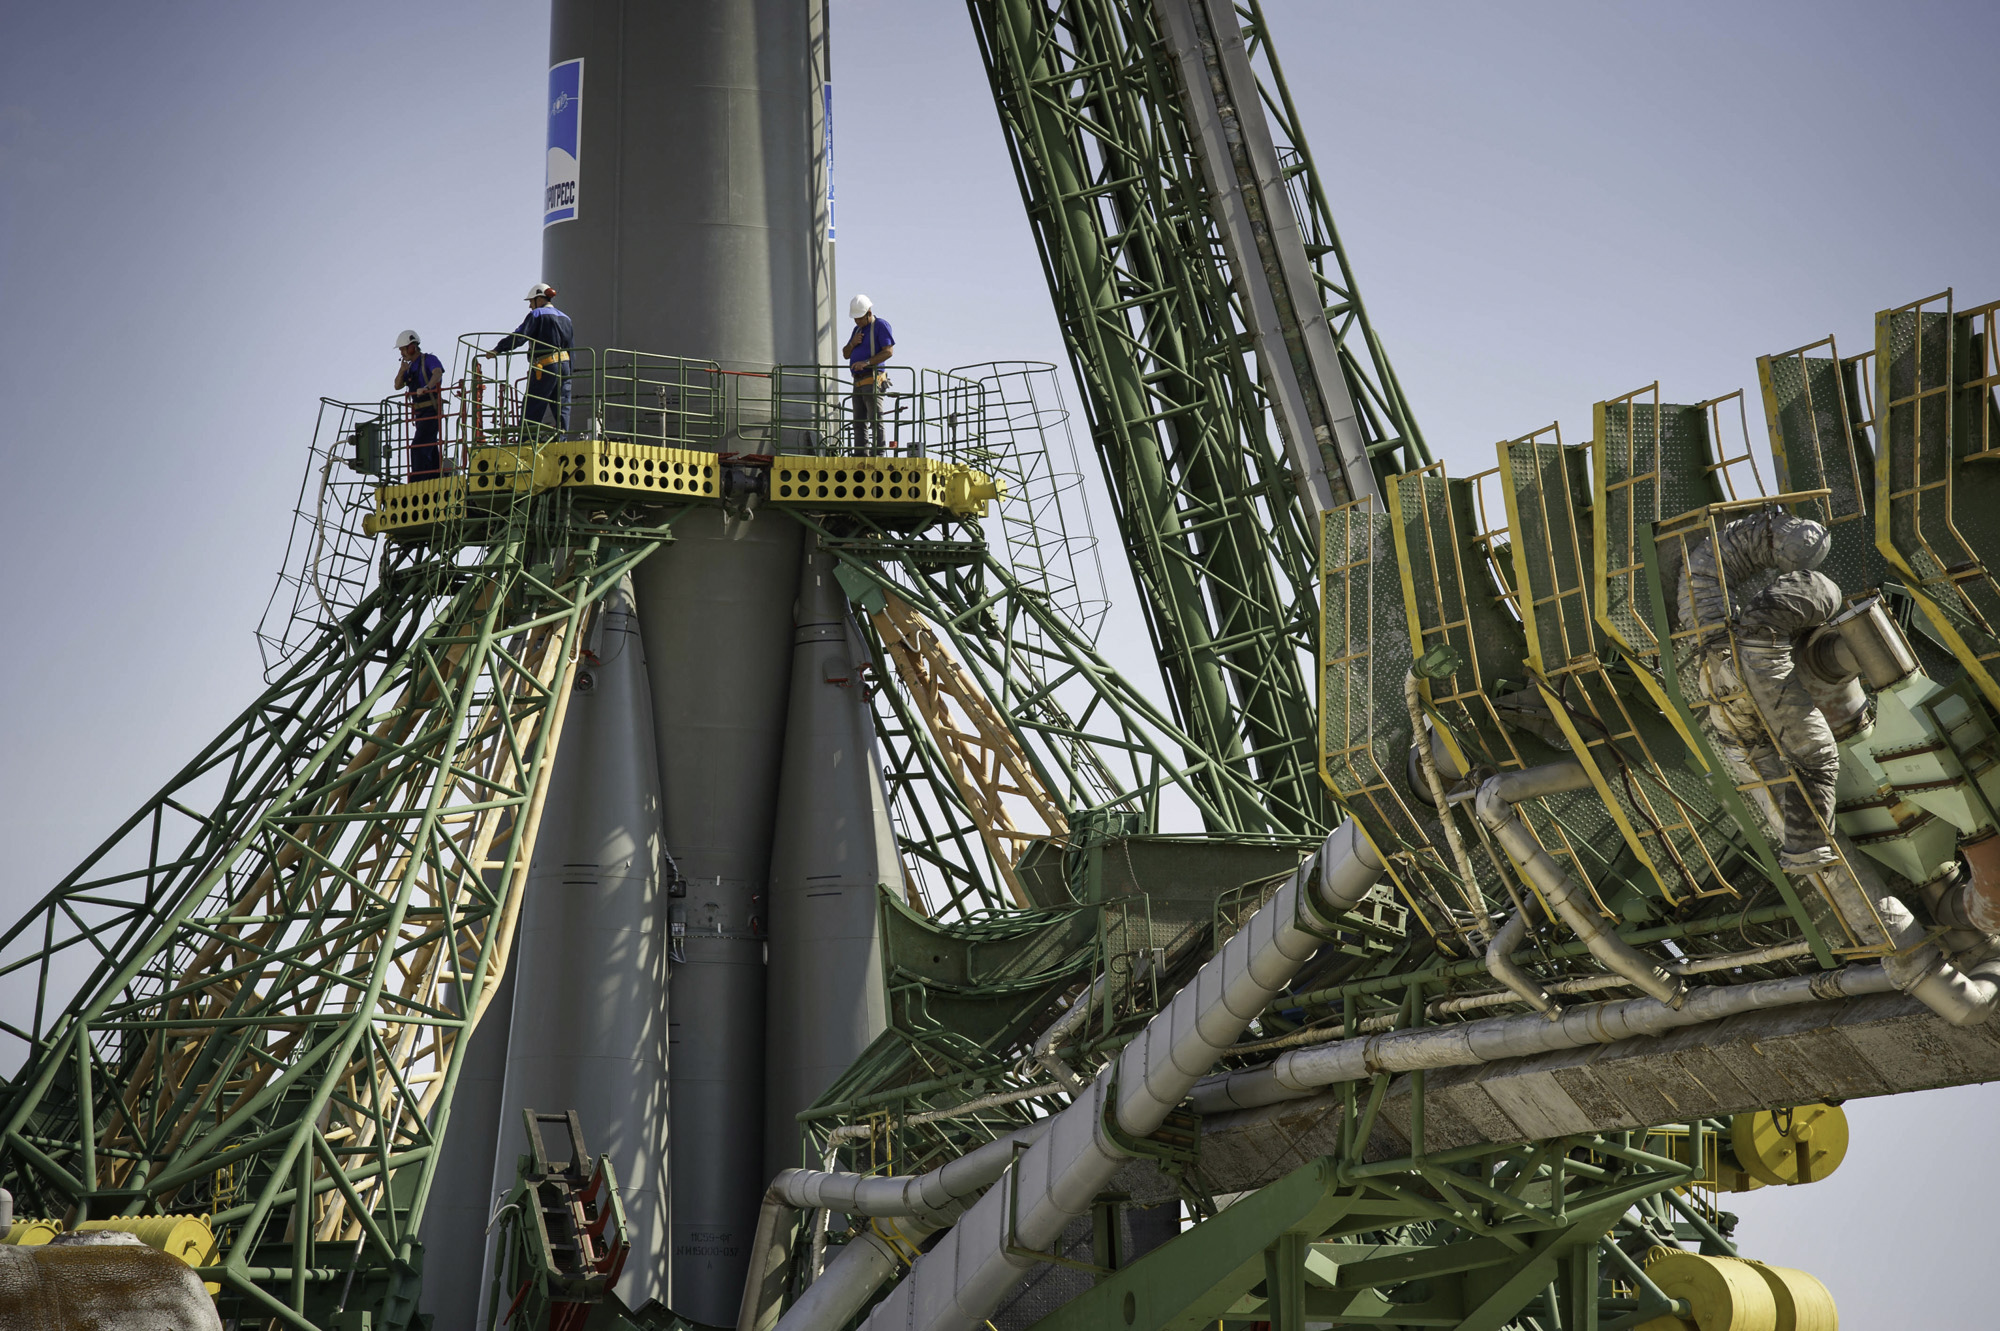  Launch pad engineers at the Baikonur Cosmodrome in Kazakhstan are dwarfed by the large gantry mechanisms at the base of the Soyuz TMA-02M rocket following its rollout to the pad on Sunday, June 5, 2011. The rocket is being prepared for launch June 8